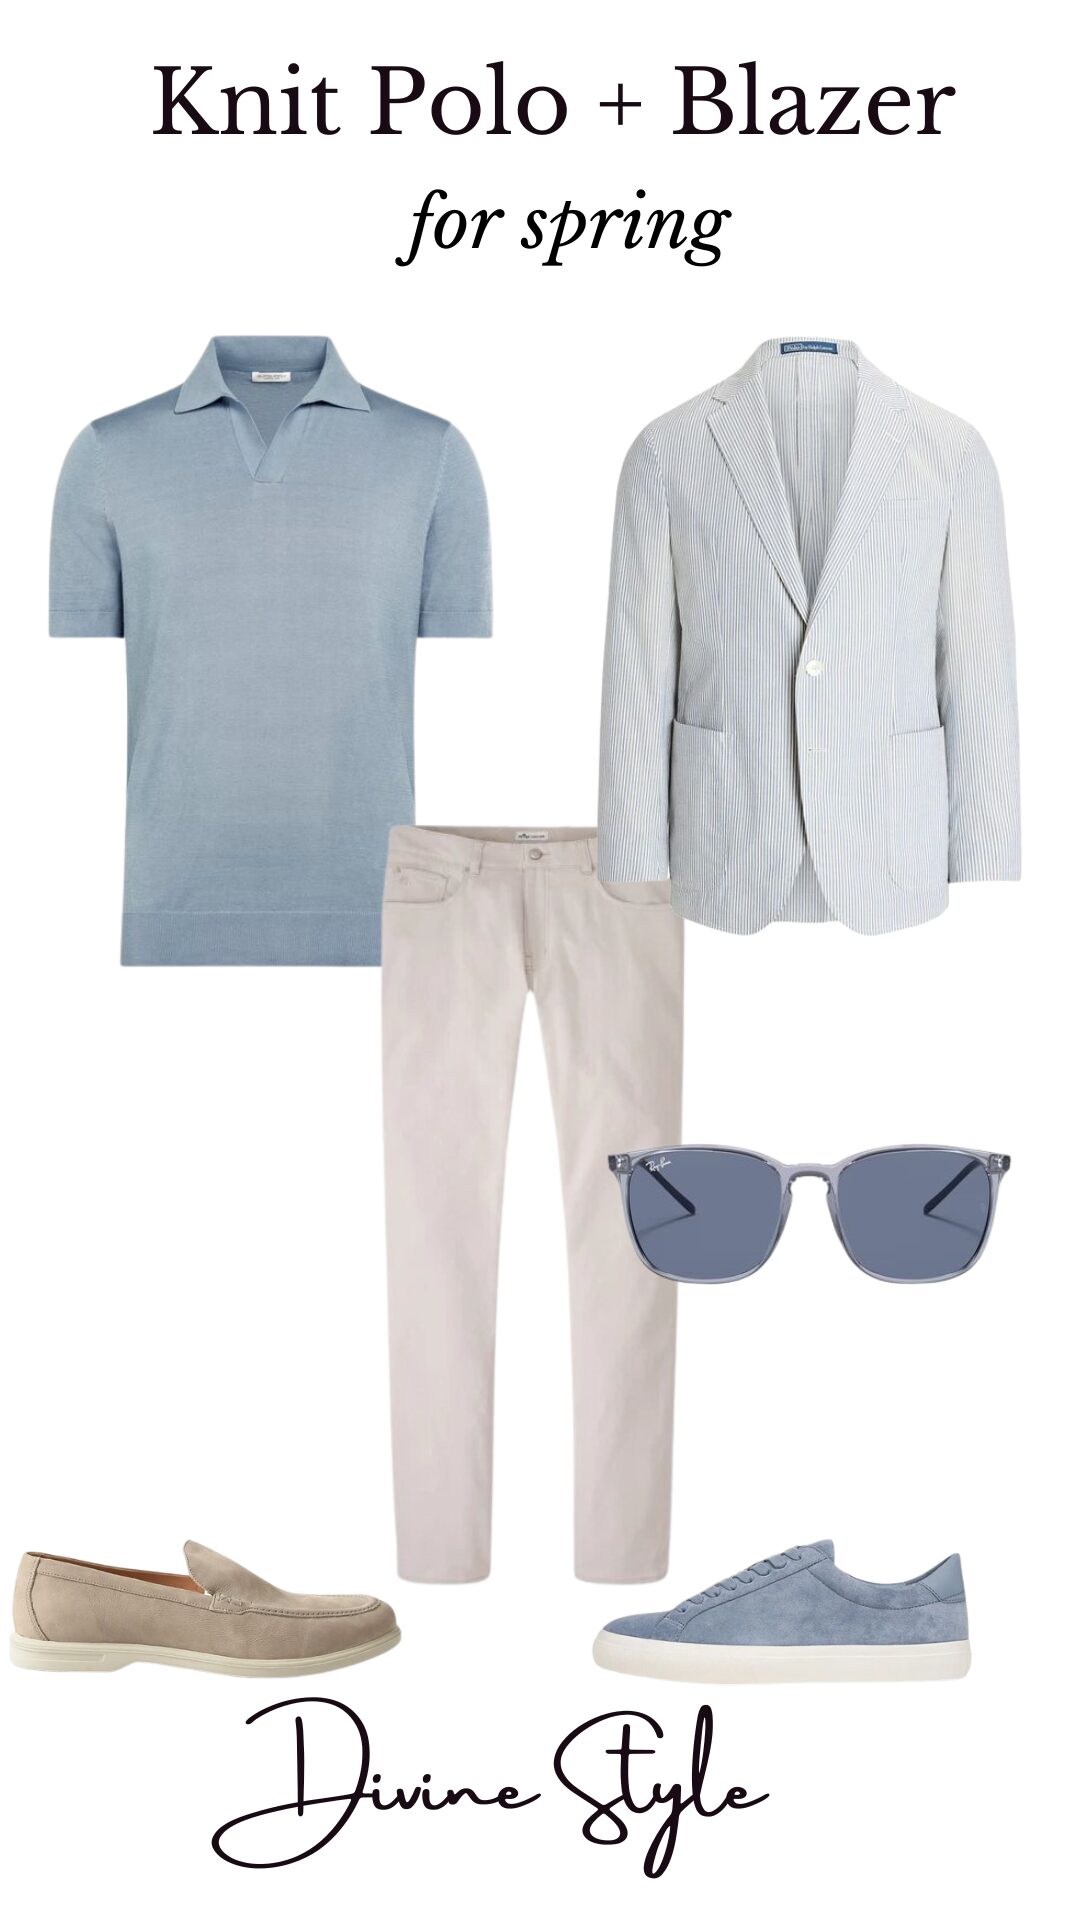 How to Elevate Your Spring Casual Outfits for men, men's casual spring outfit, men's blue knit polo shirt and blazer outfit